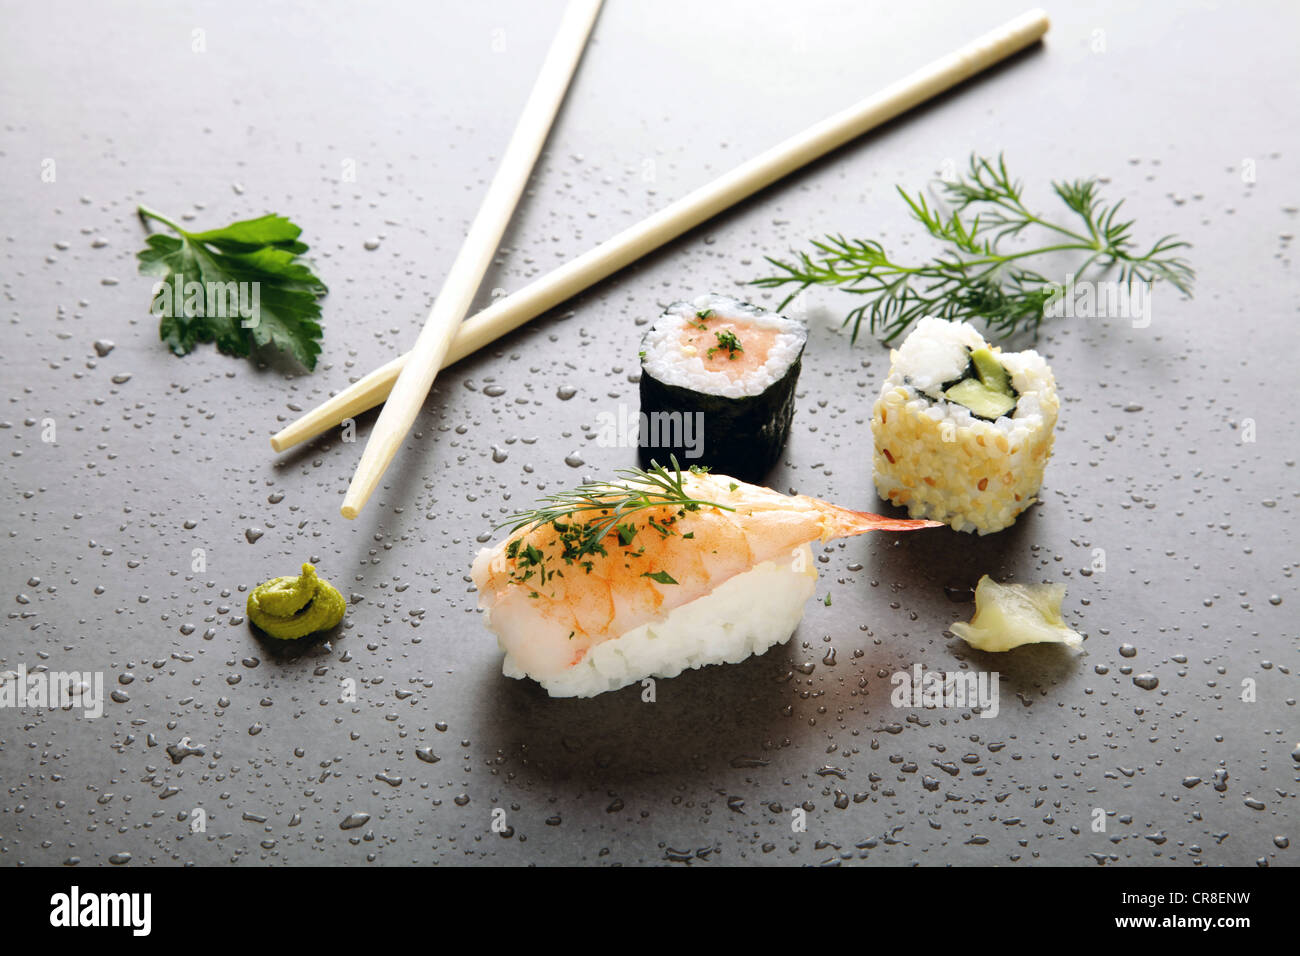 Assorted sushi with ginger and wasabi on a stone surface Stock Photo